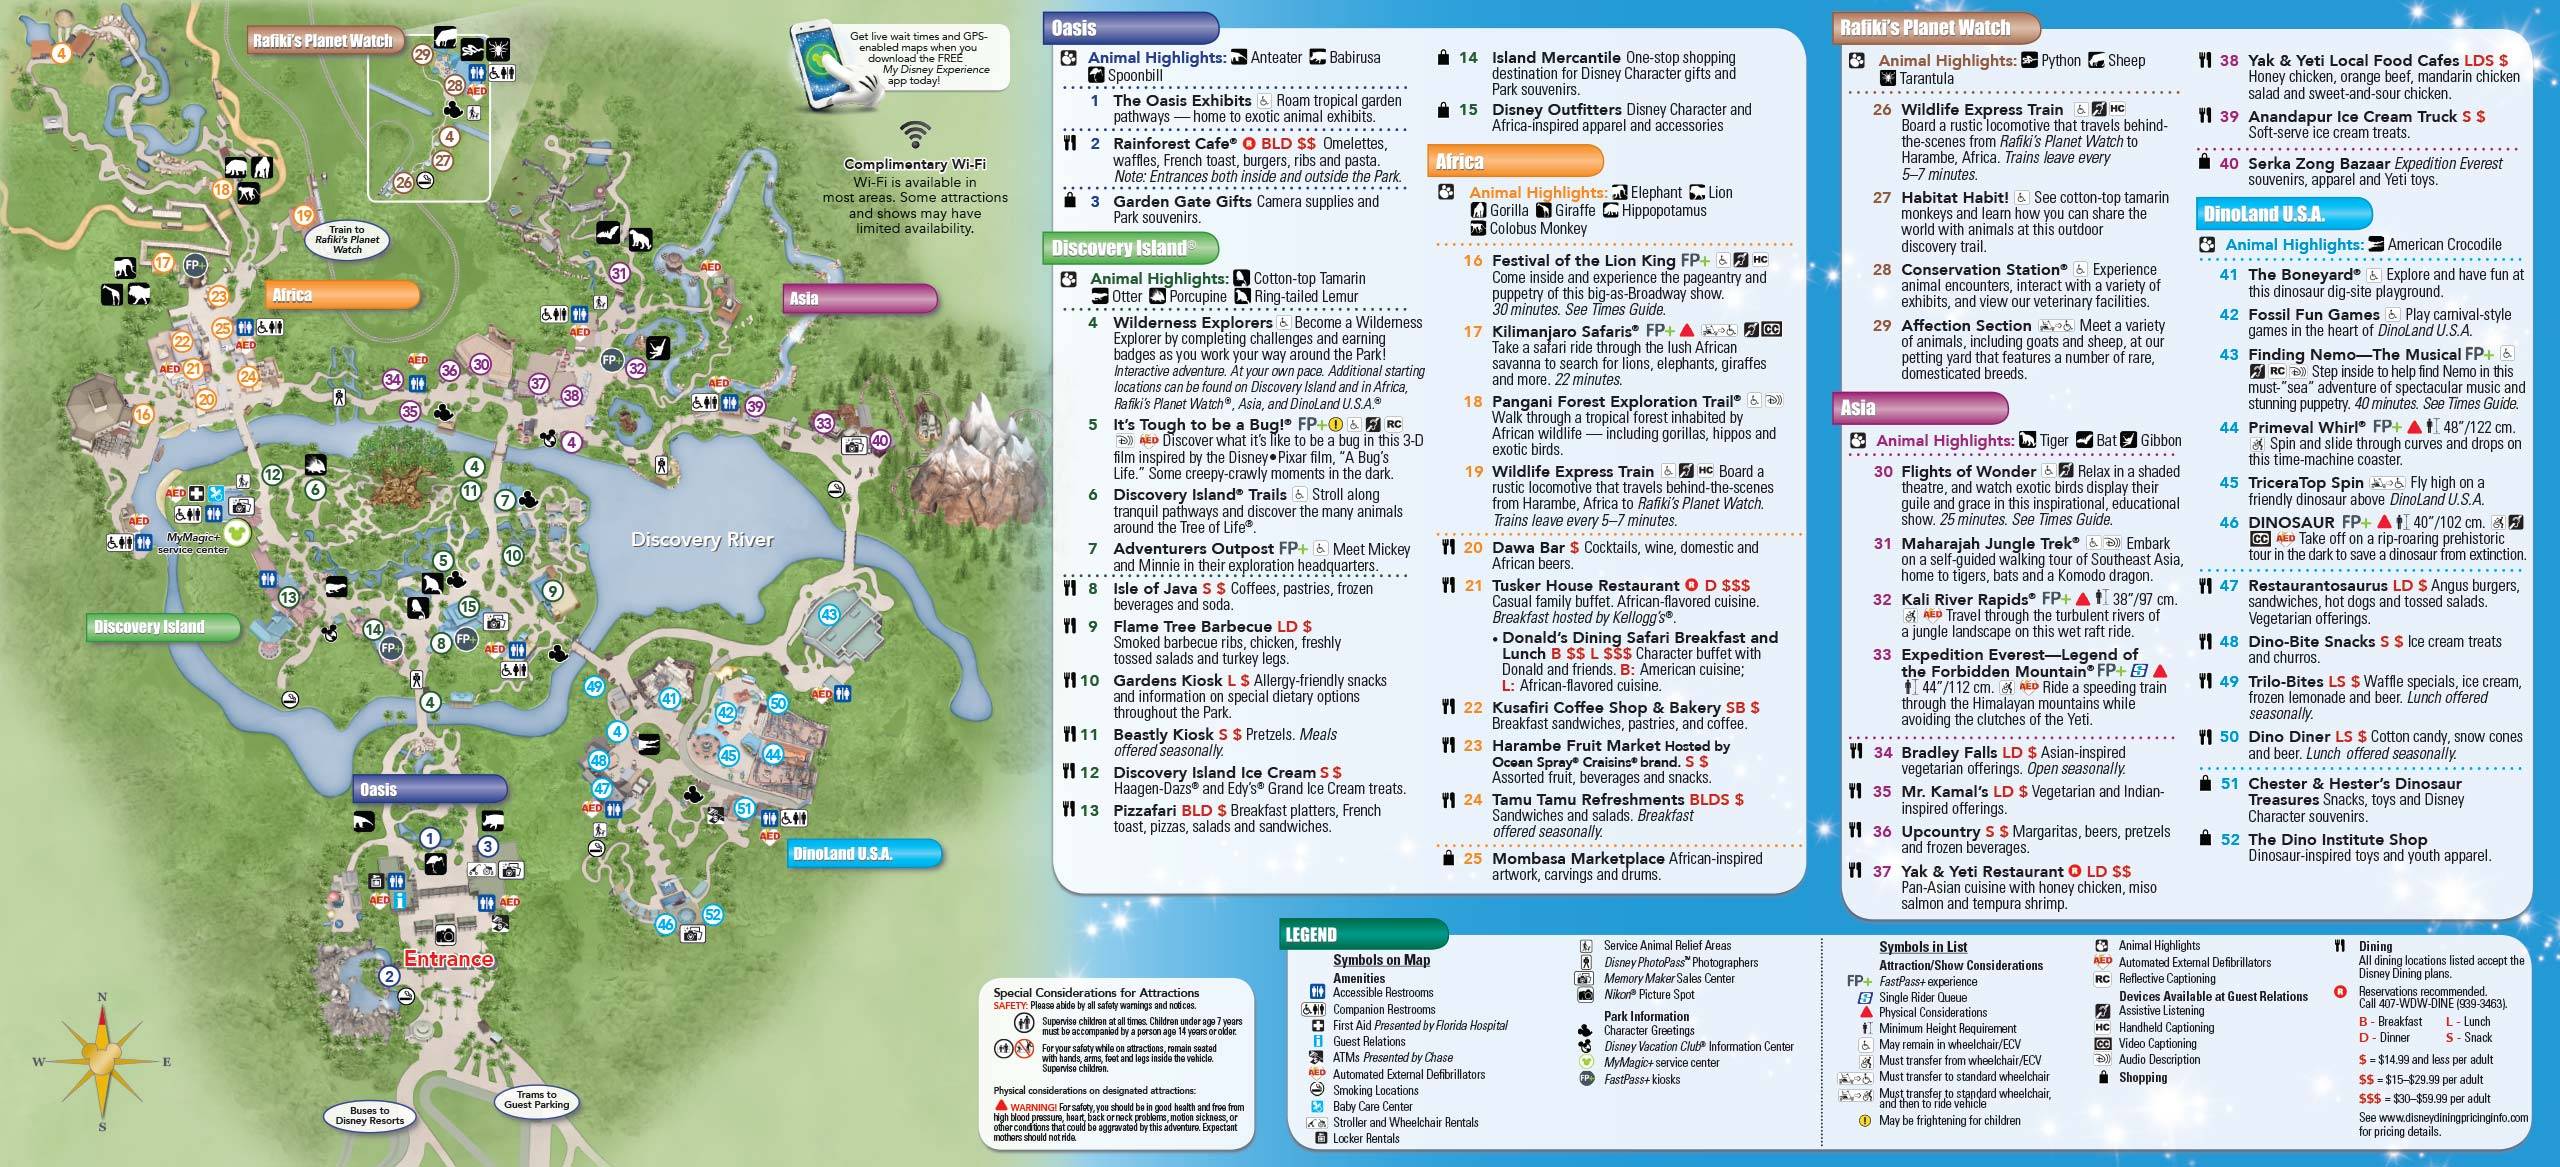 PHOTOS - New guide map for Disney's Animal Kingdom includes new Harambe area and Festival of the Lion King